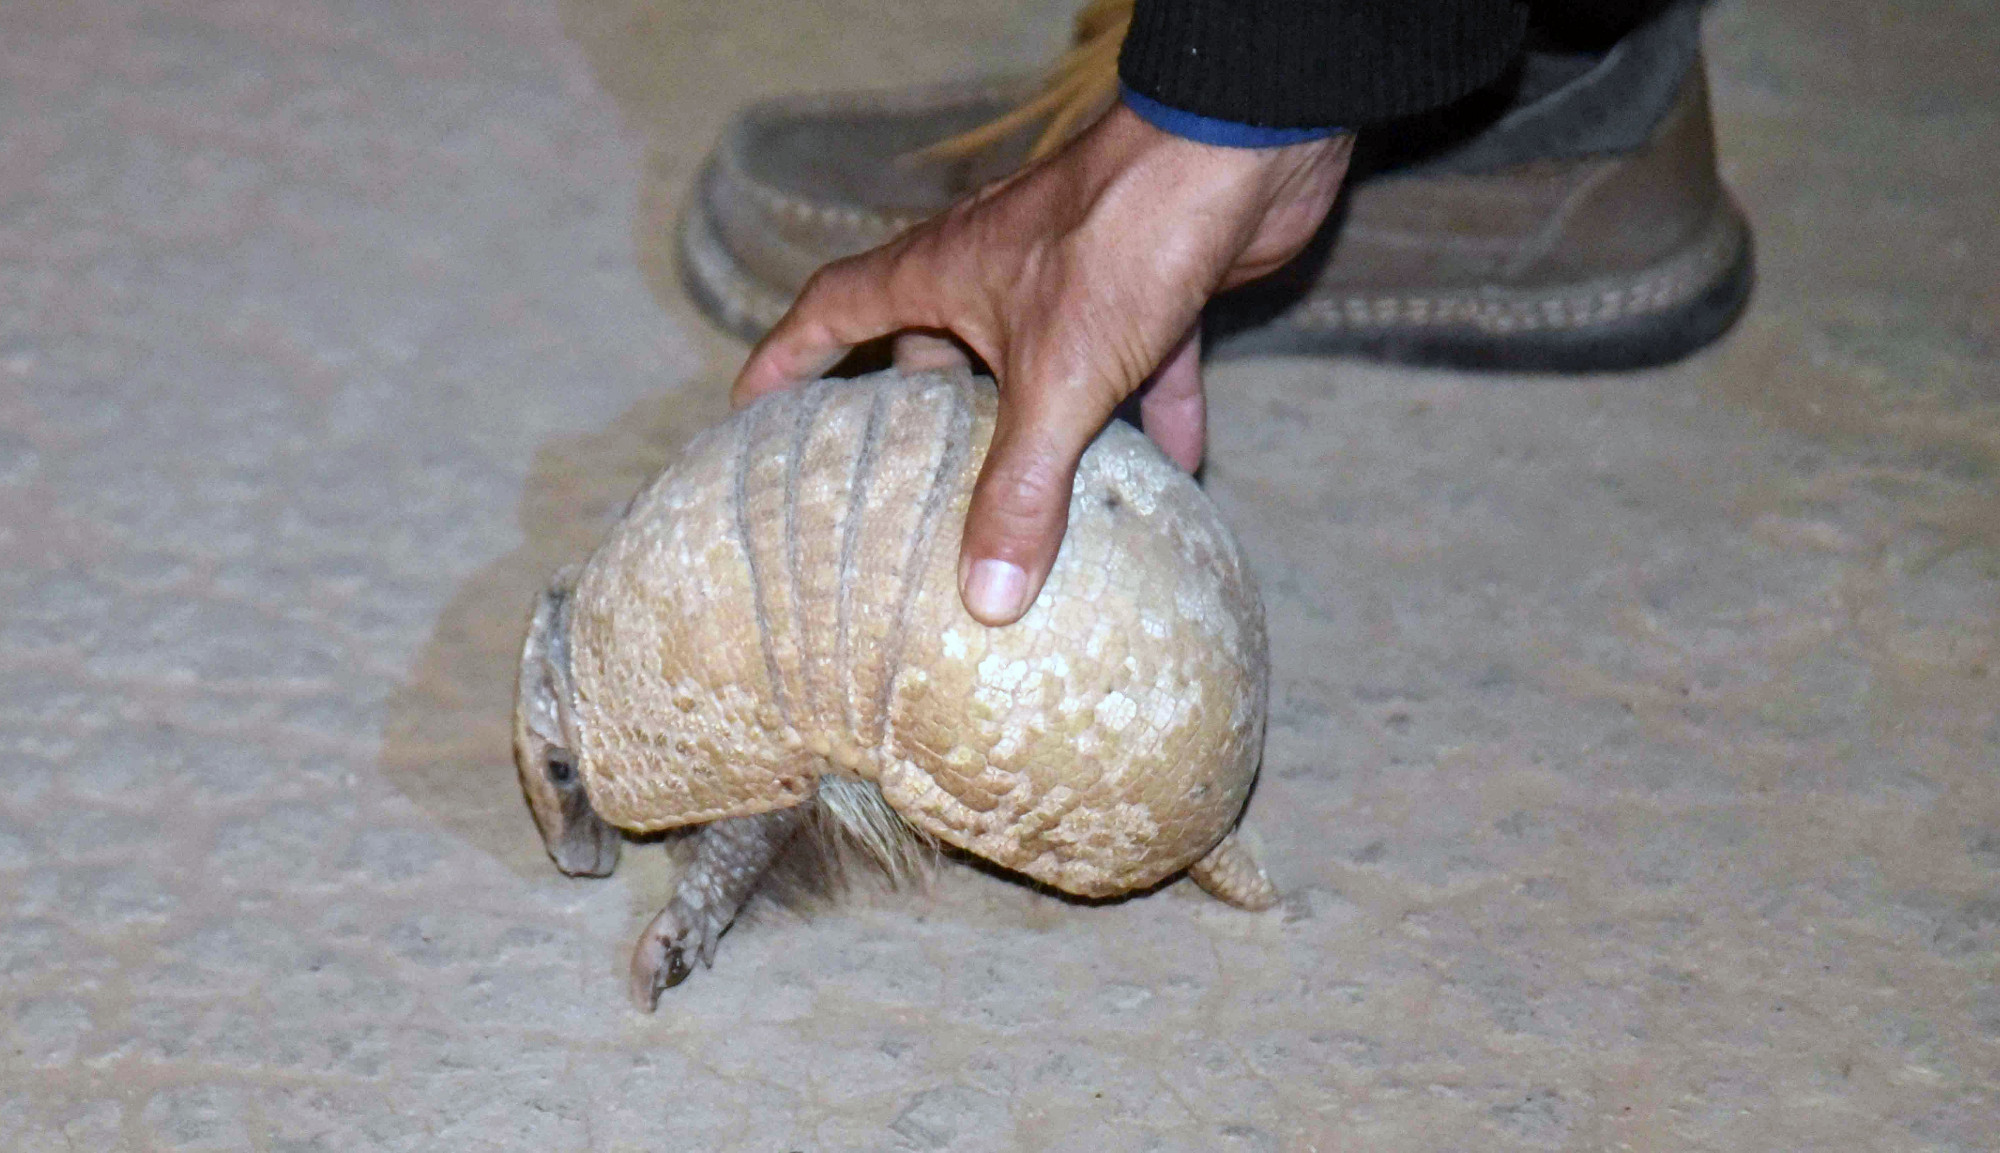 Former Armadillo Hunter Says He Contracted Leprosy